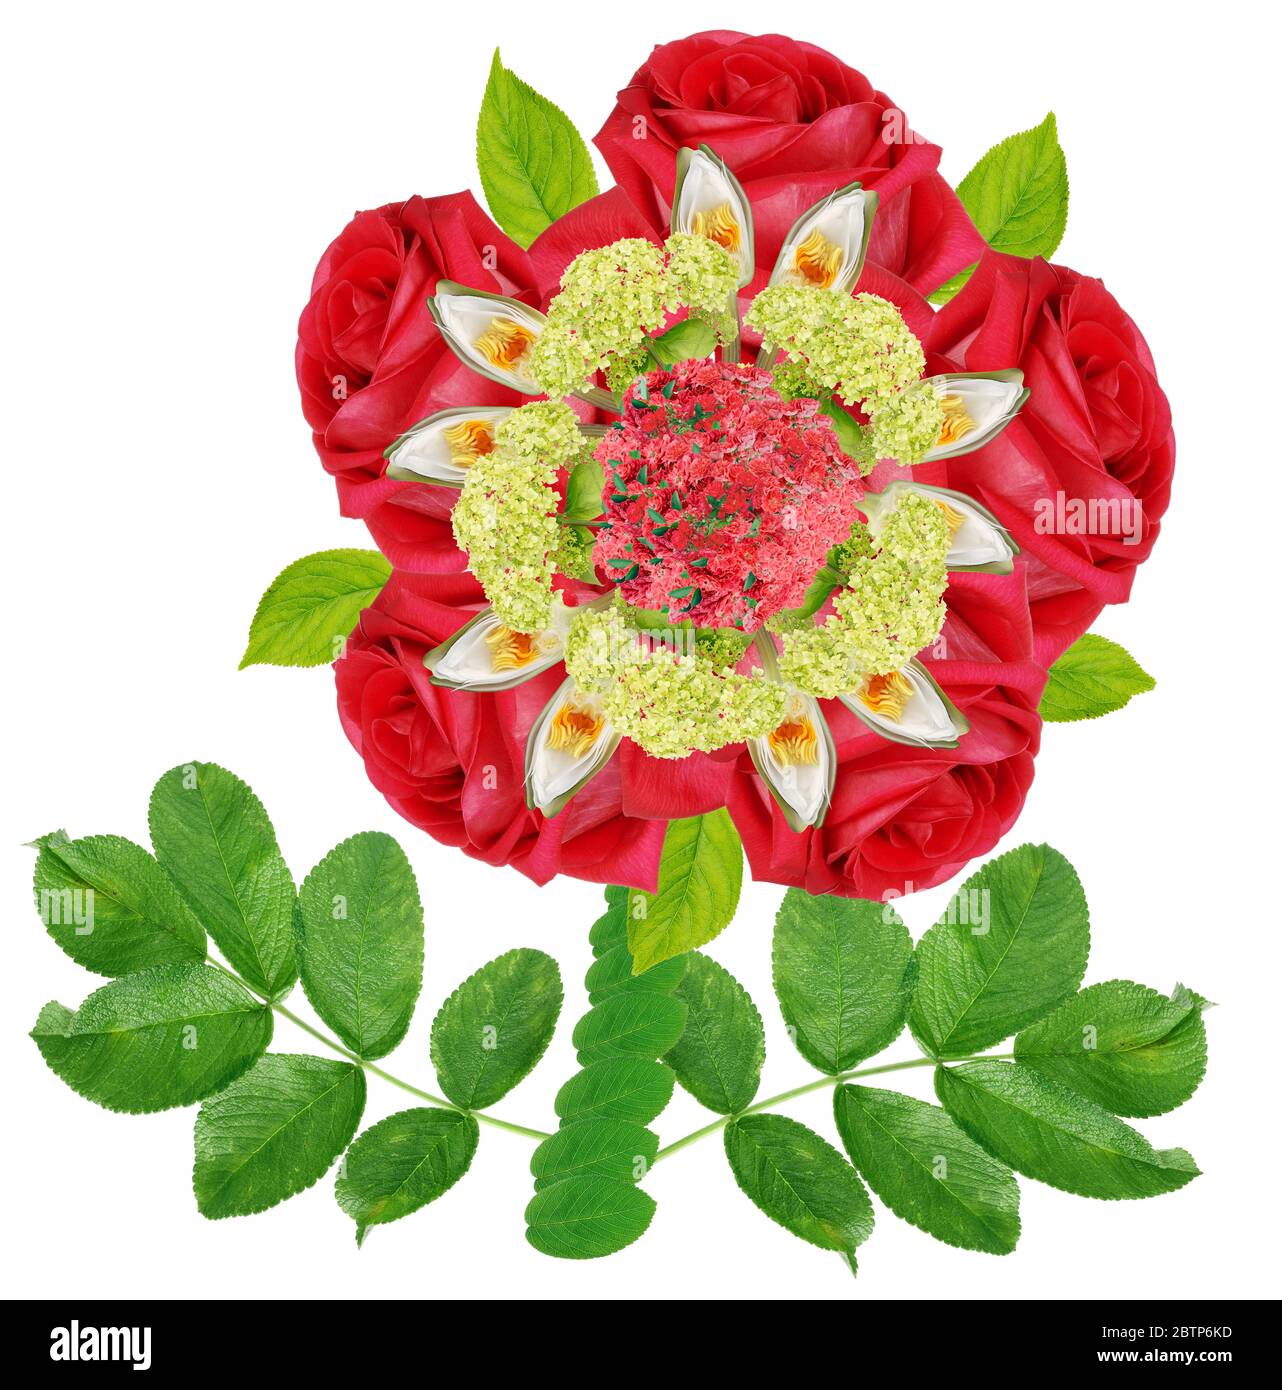 The heraldic rose has five or ten petals, which connects it with the Pythagorean pentad and decade. Rose with red petals and white stamens - emblem of Stock Photo